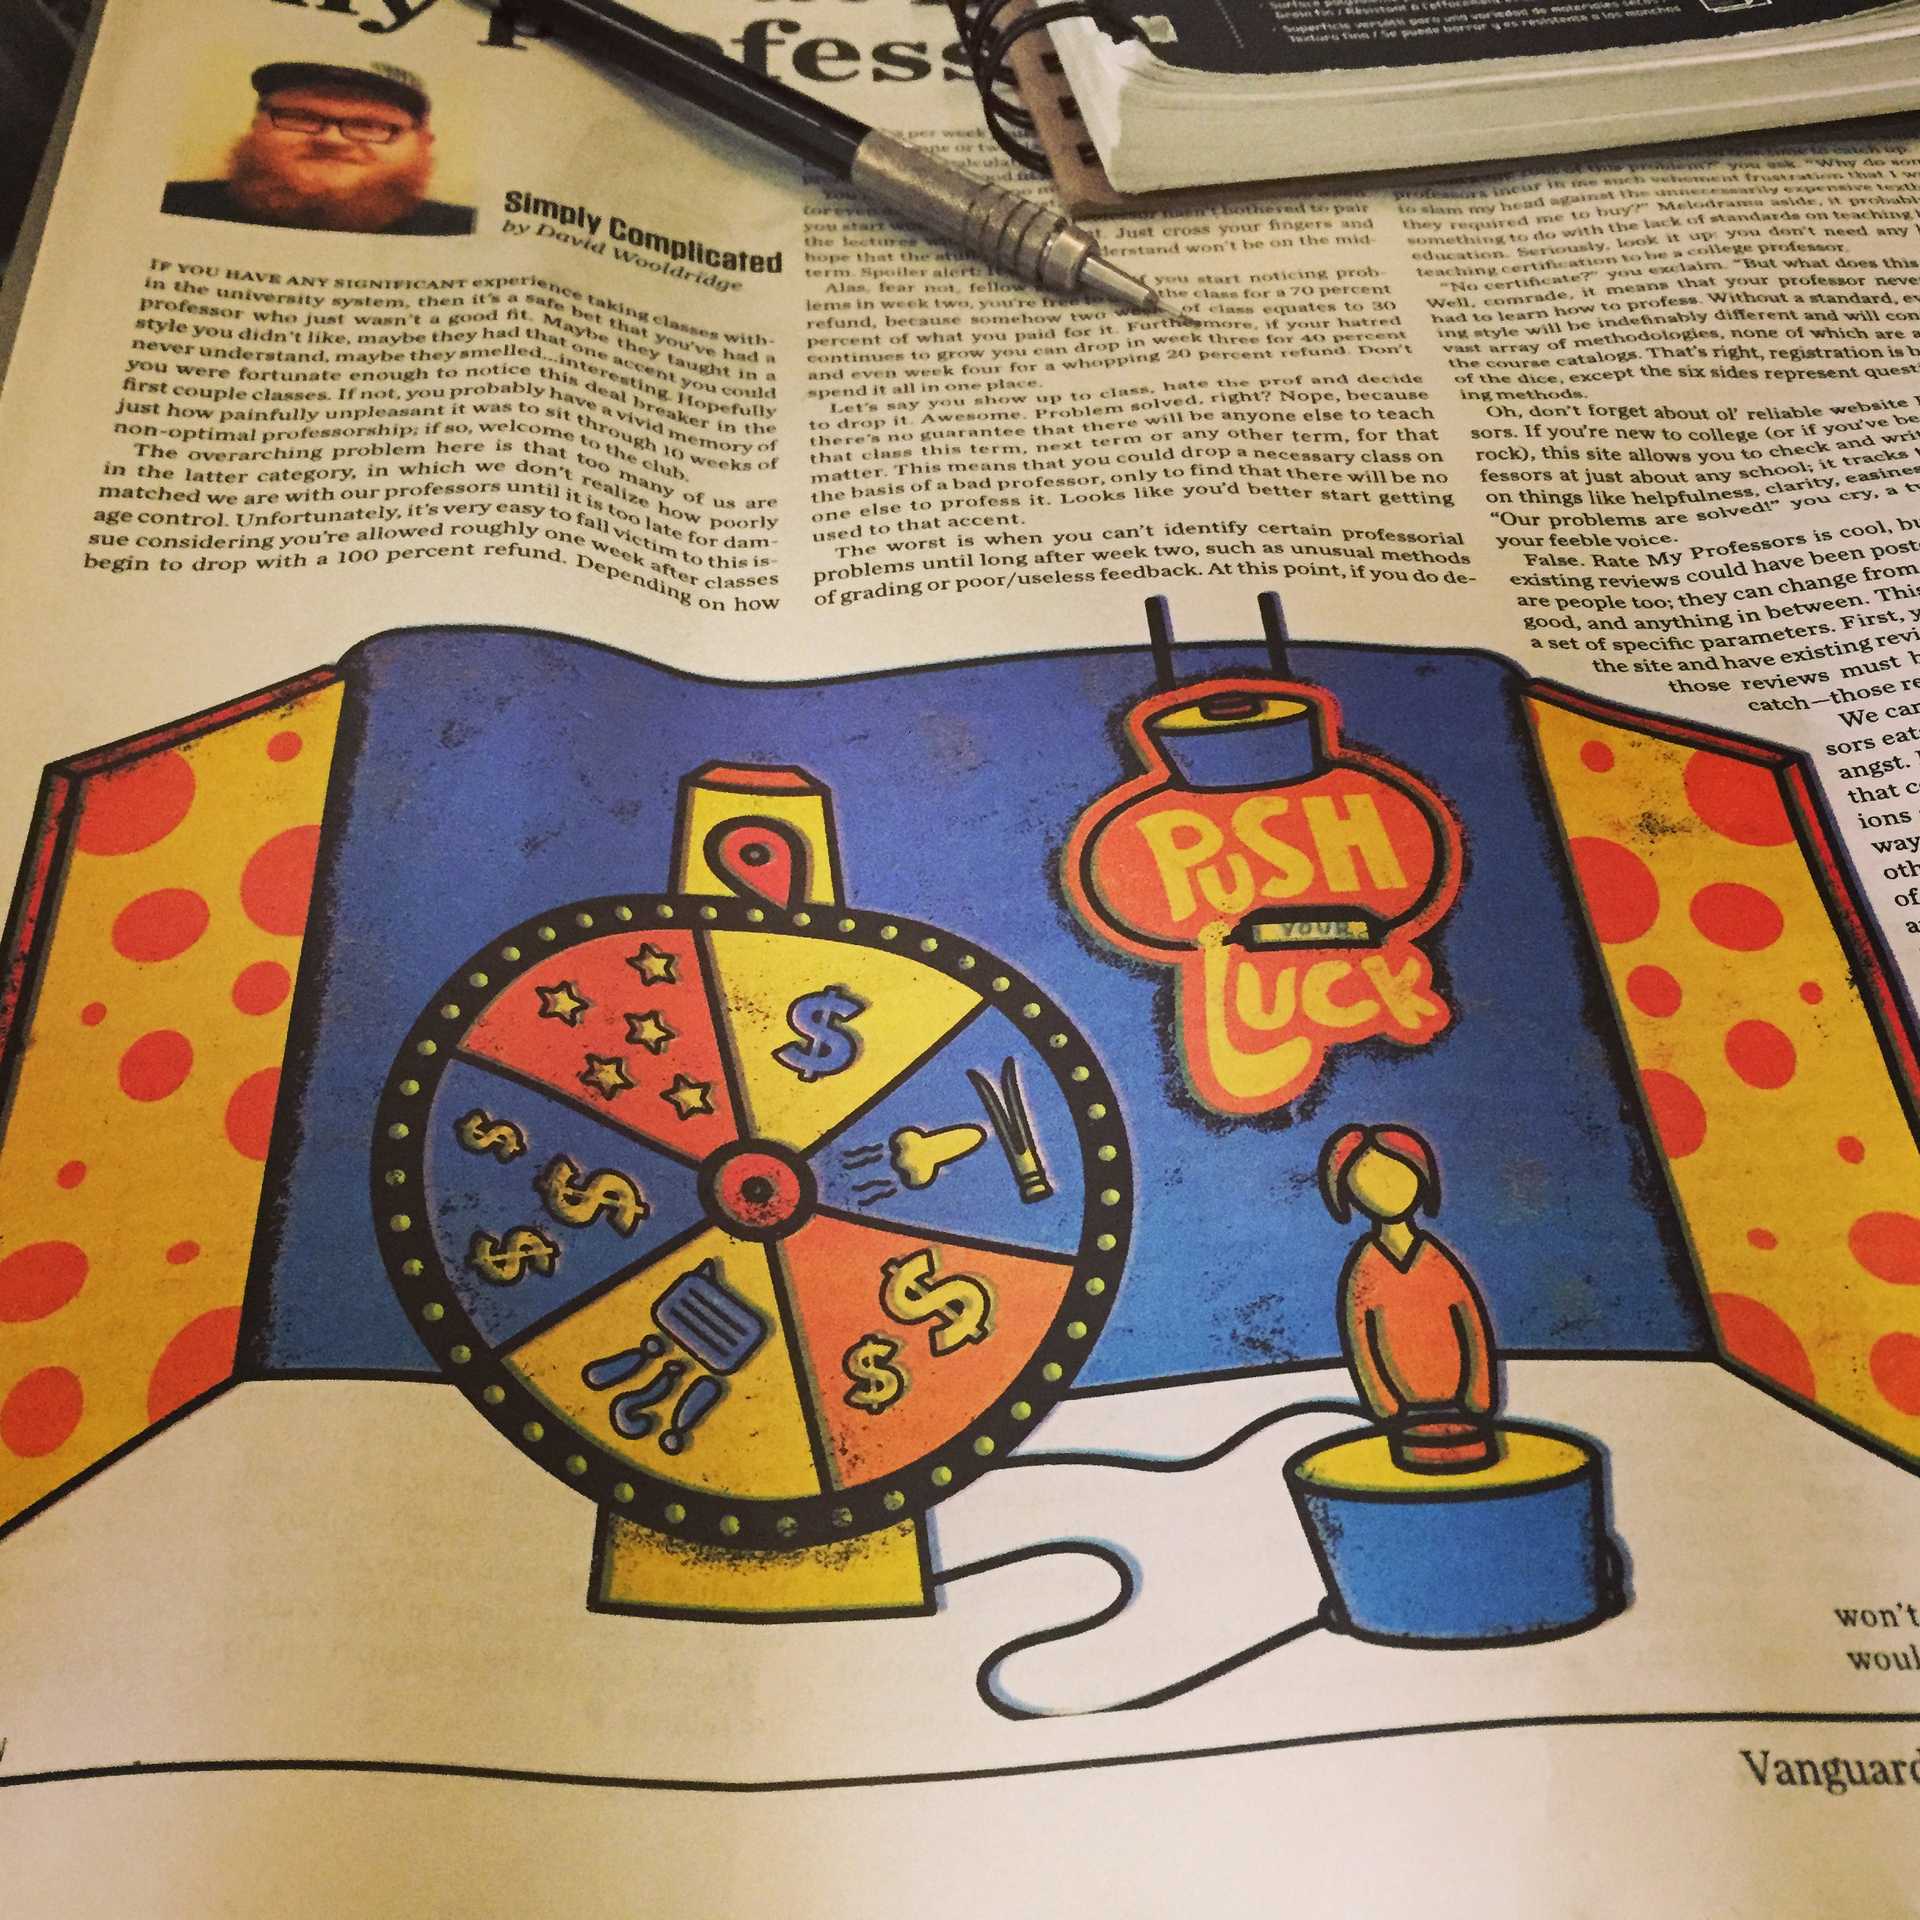 A picture of the printed “But what if my professor sucks?” Editorial Illustration in the Portland State University Vanguard.